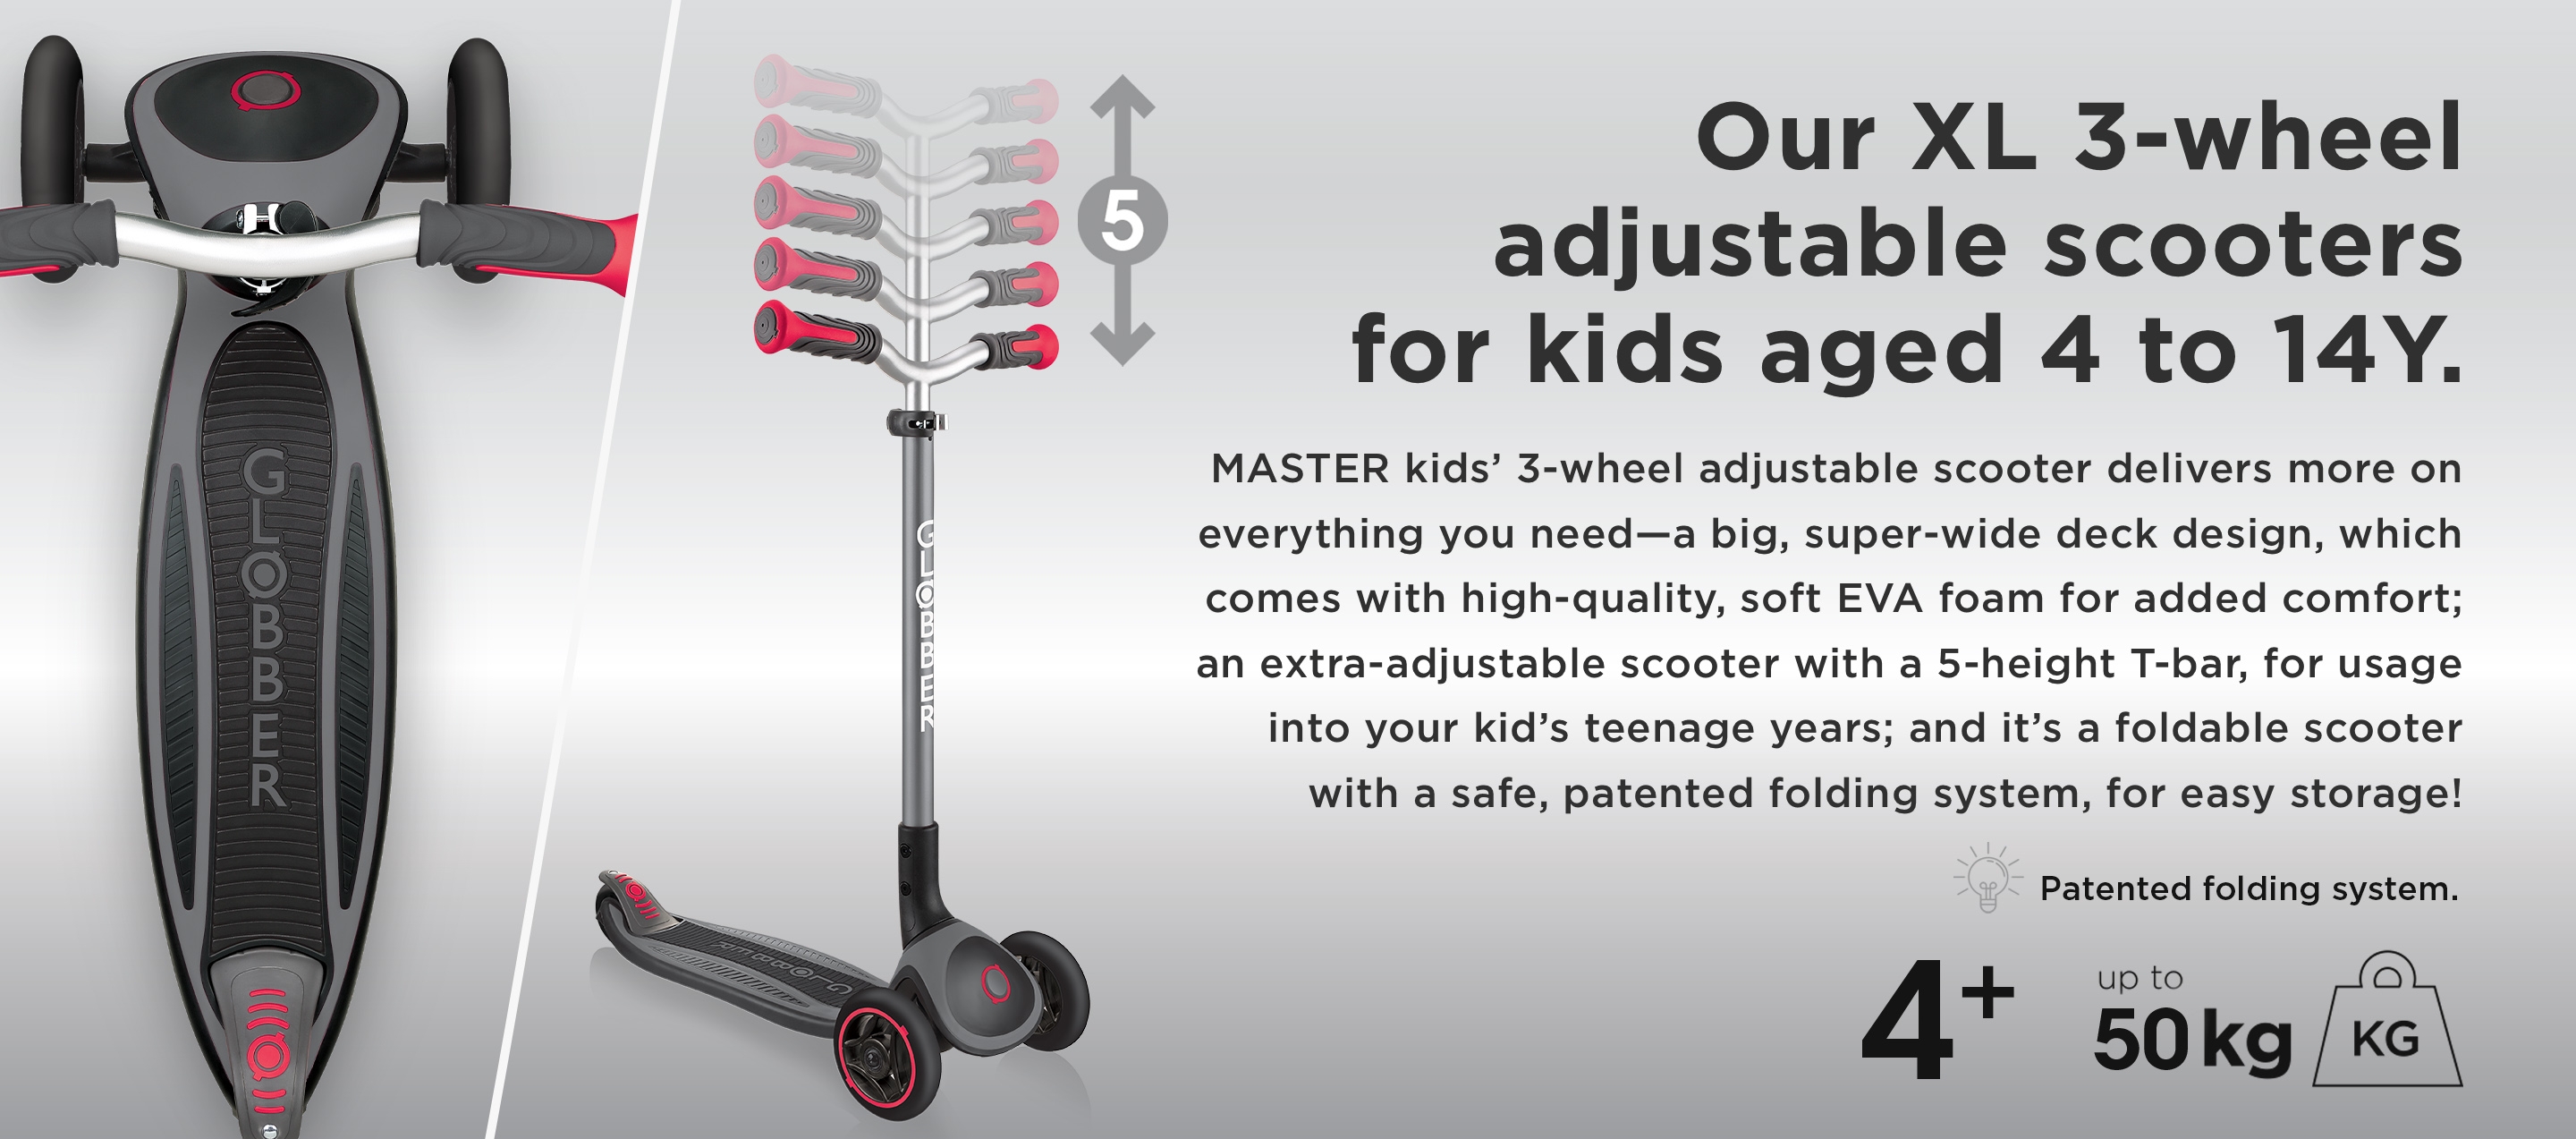 Our XL 3-wheel adjustable scooters for kids aged 4 to 14Y. MASTER kids’ 3-wheel adjustable scooter delivers more on everything you need—a big, super-wide deck design, which comes with high-quality, soft EVA foam for added comfort; an extra adjustable scooter with a 5-height T-bar, for usage into your kid’s teenage years; and it’s a foldable scooter with a safe, patented folding system, for easy storage!